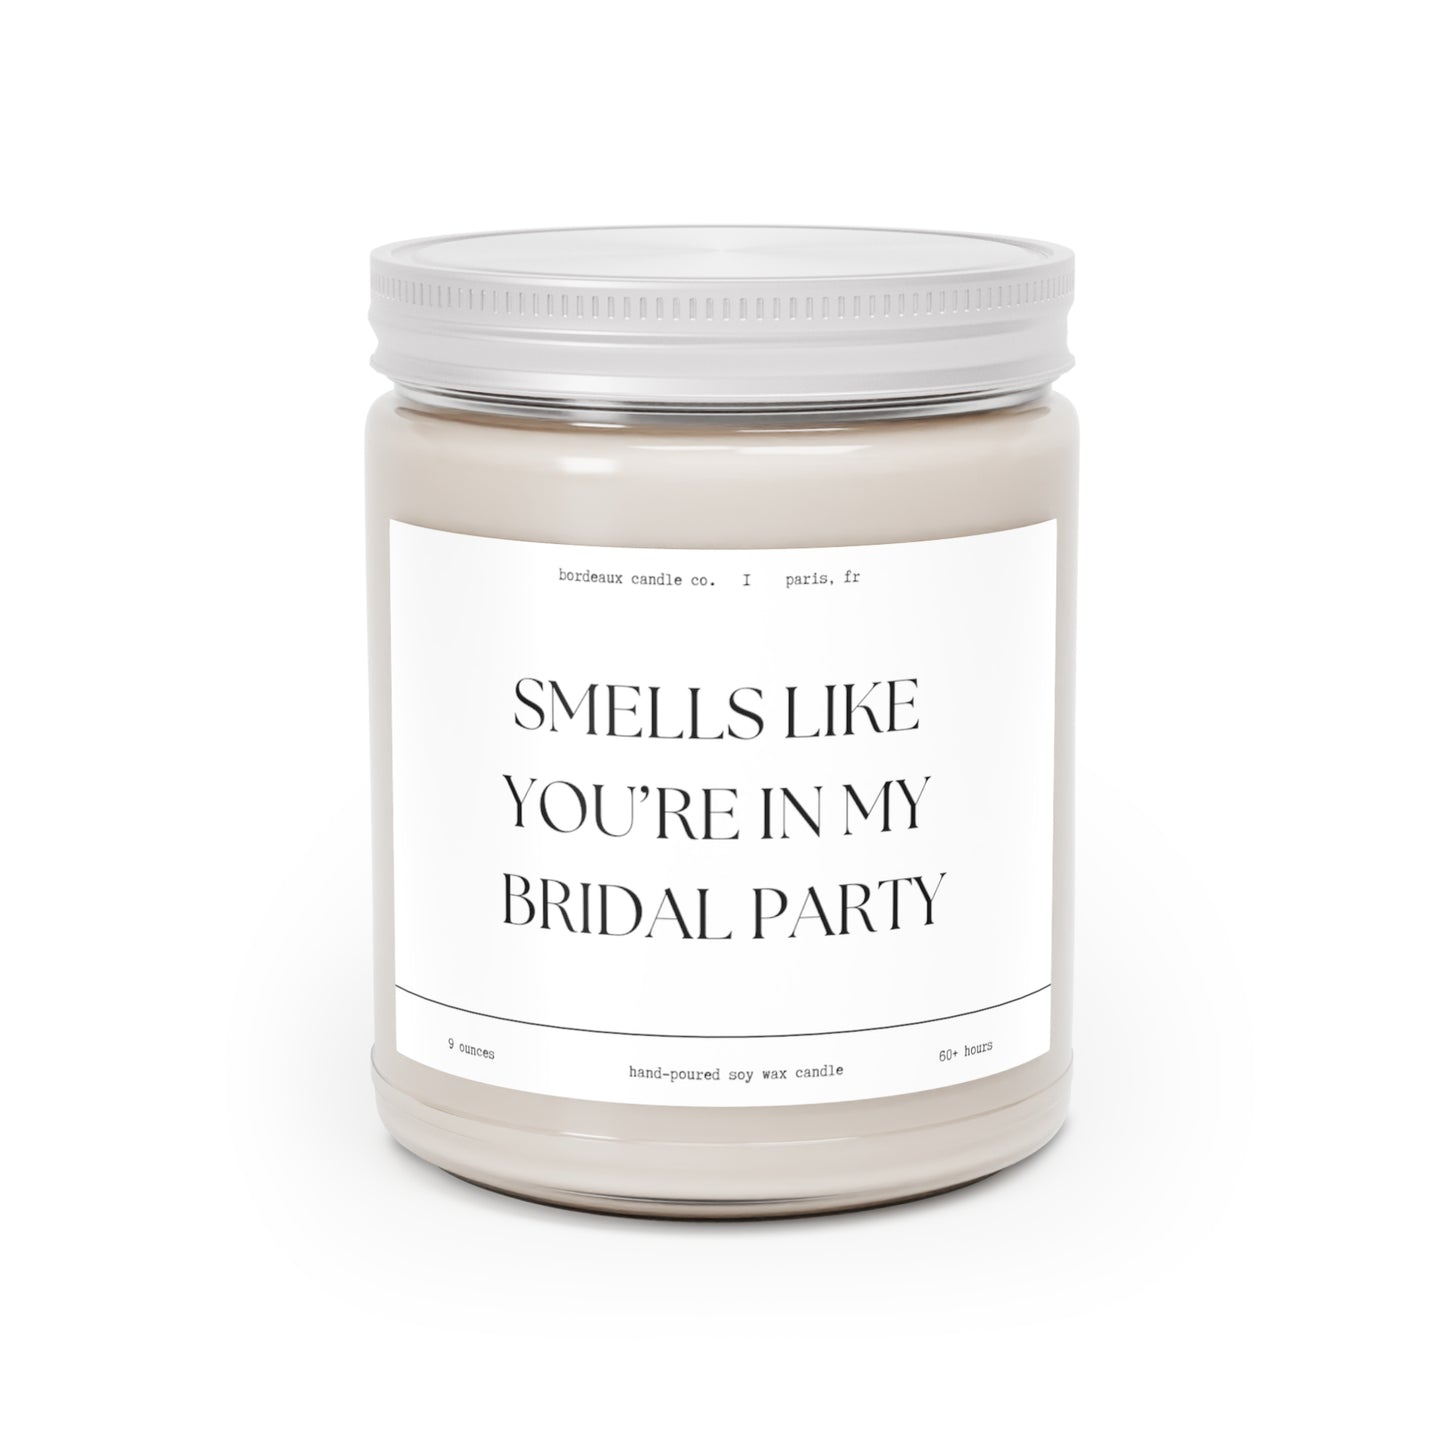 Bridesmaid Gifts Bridesmaid Proposal Bridesmaid Candle Wedding Bridesmaids' Gifts Bridesmaid Candle Smells Like Youre In The Bridal Party, Scented Candles, 9oz